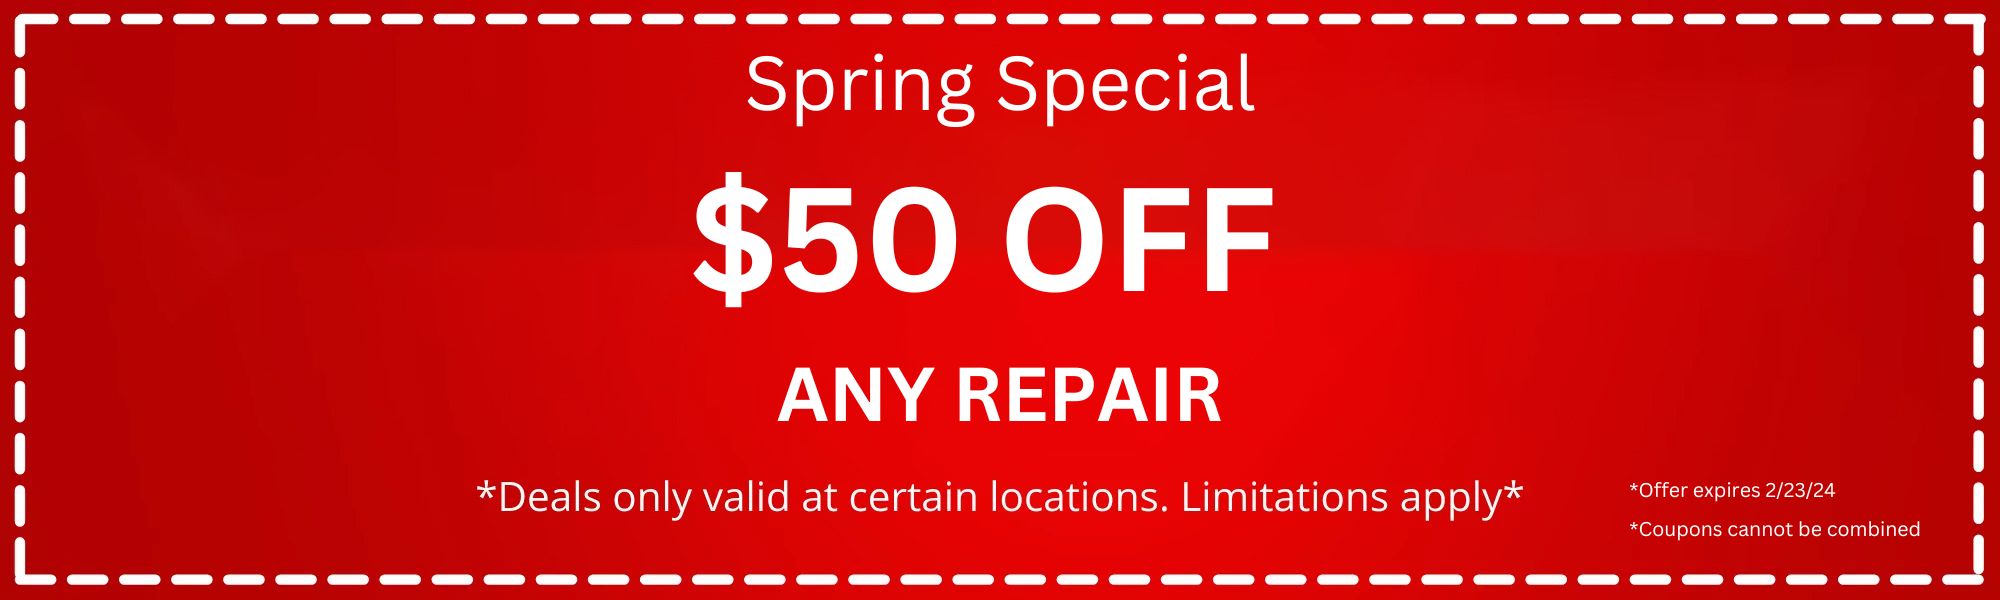 Spring Special: $50 off any repair. Deals only valid at certain locations. Limitations apply. Offer expires 2/23/24. Coupons cannot be combined.